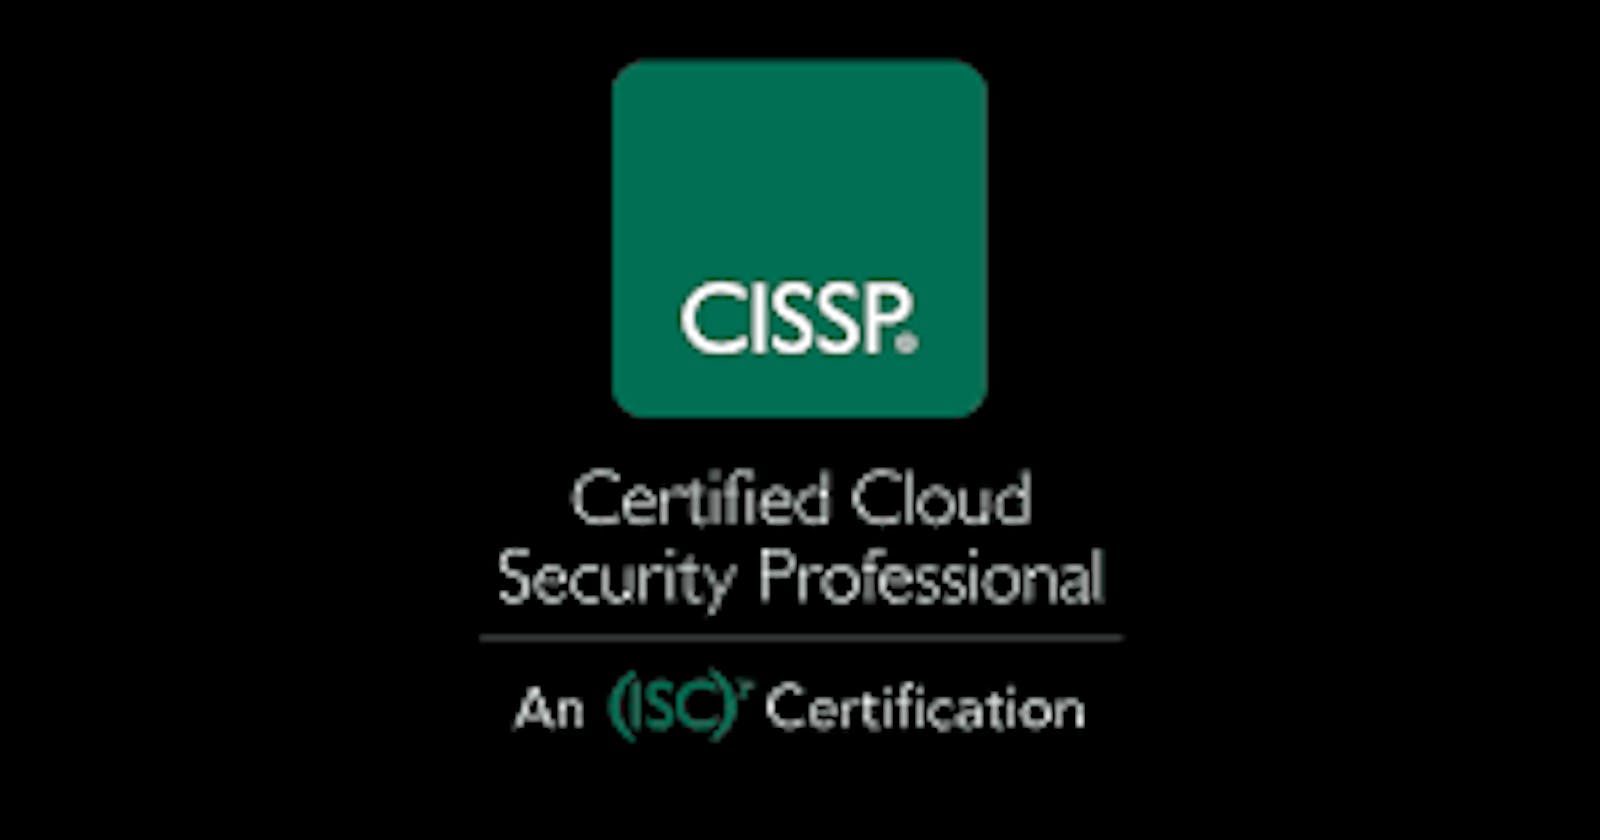 What is the best way to pass CISSP Exam?